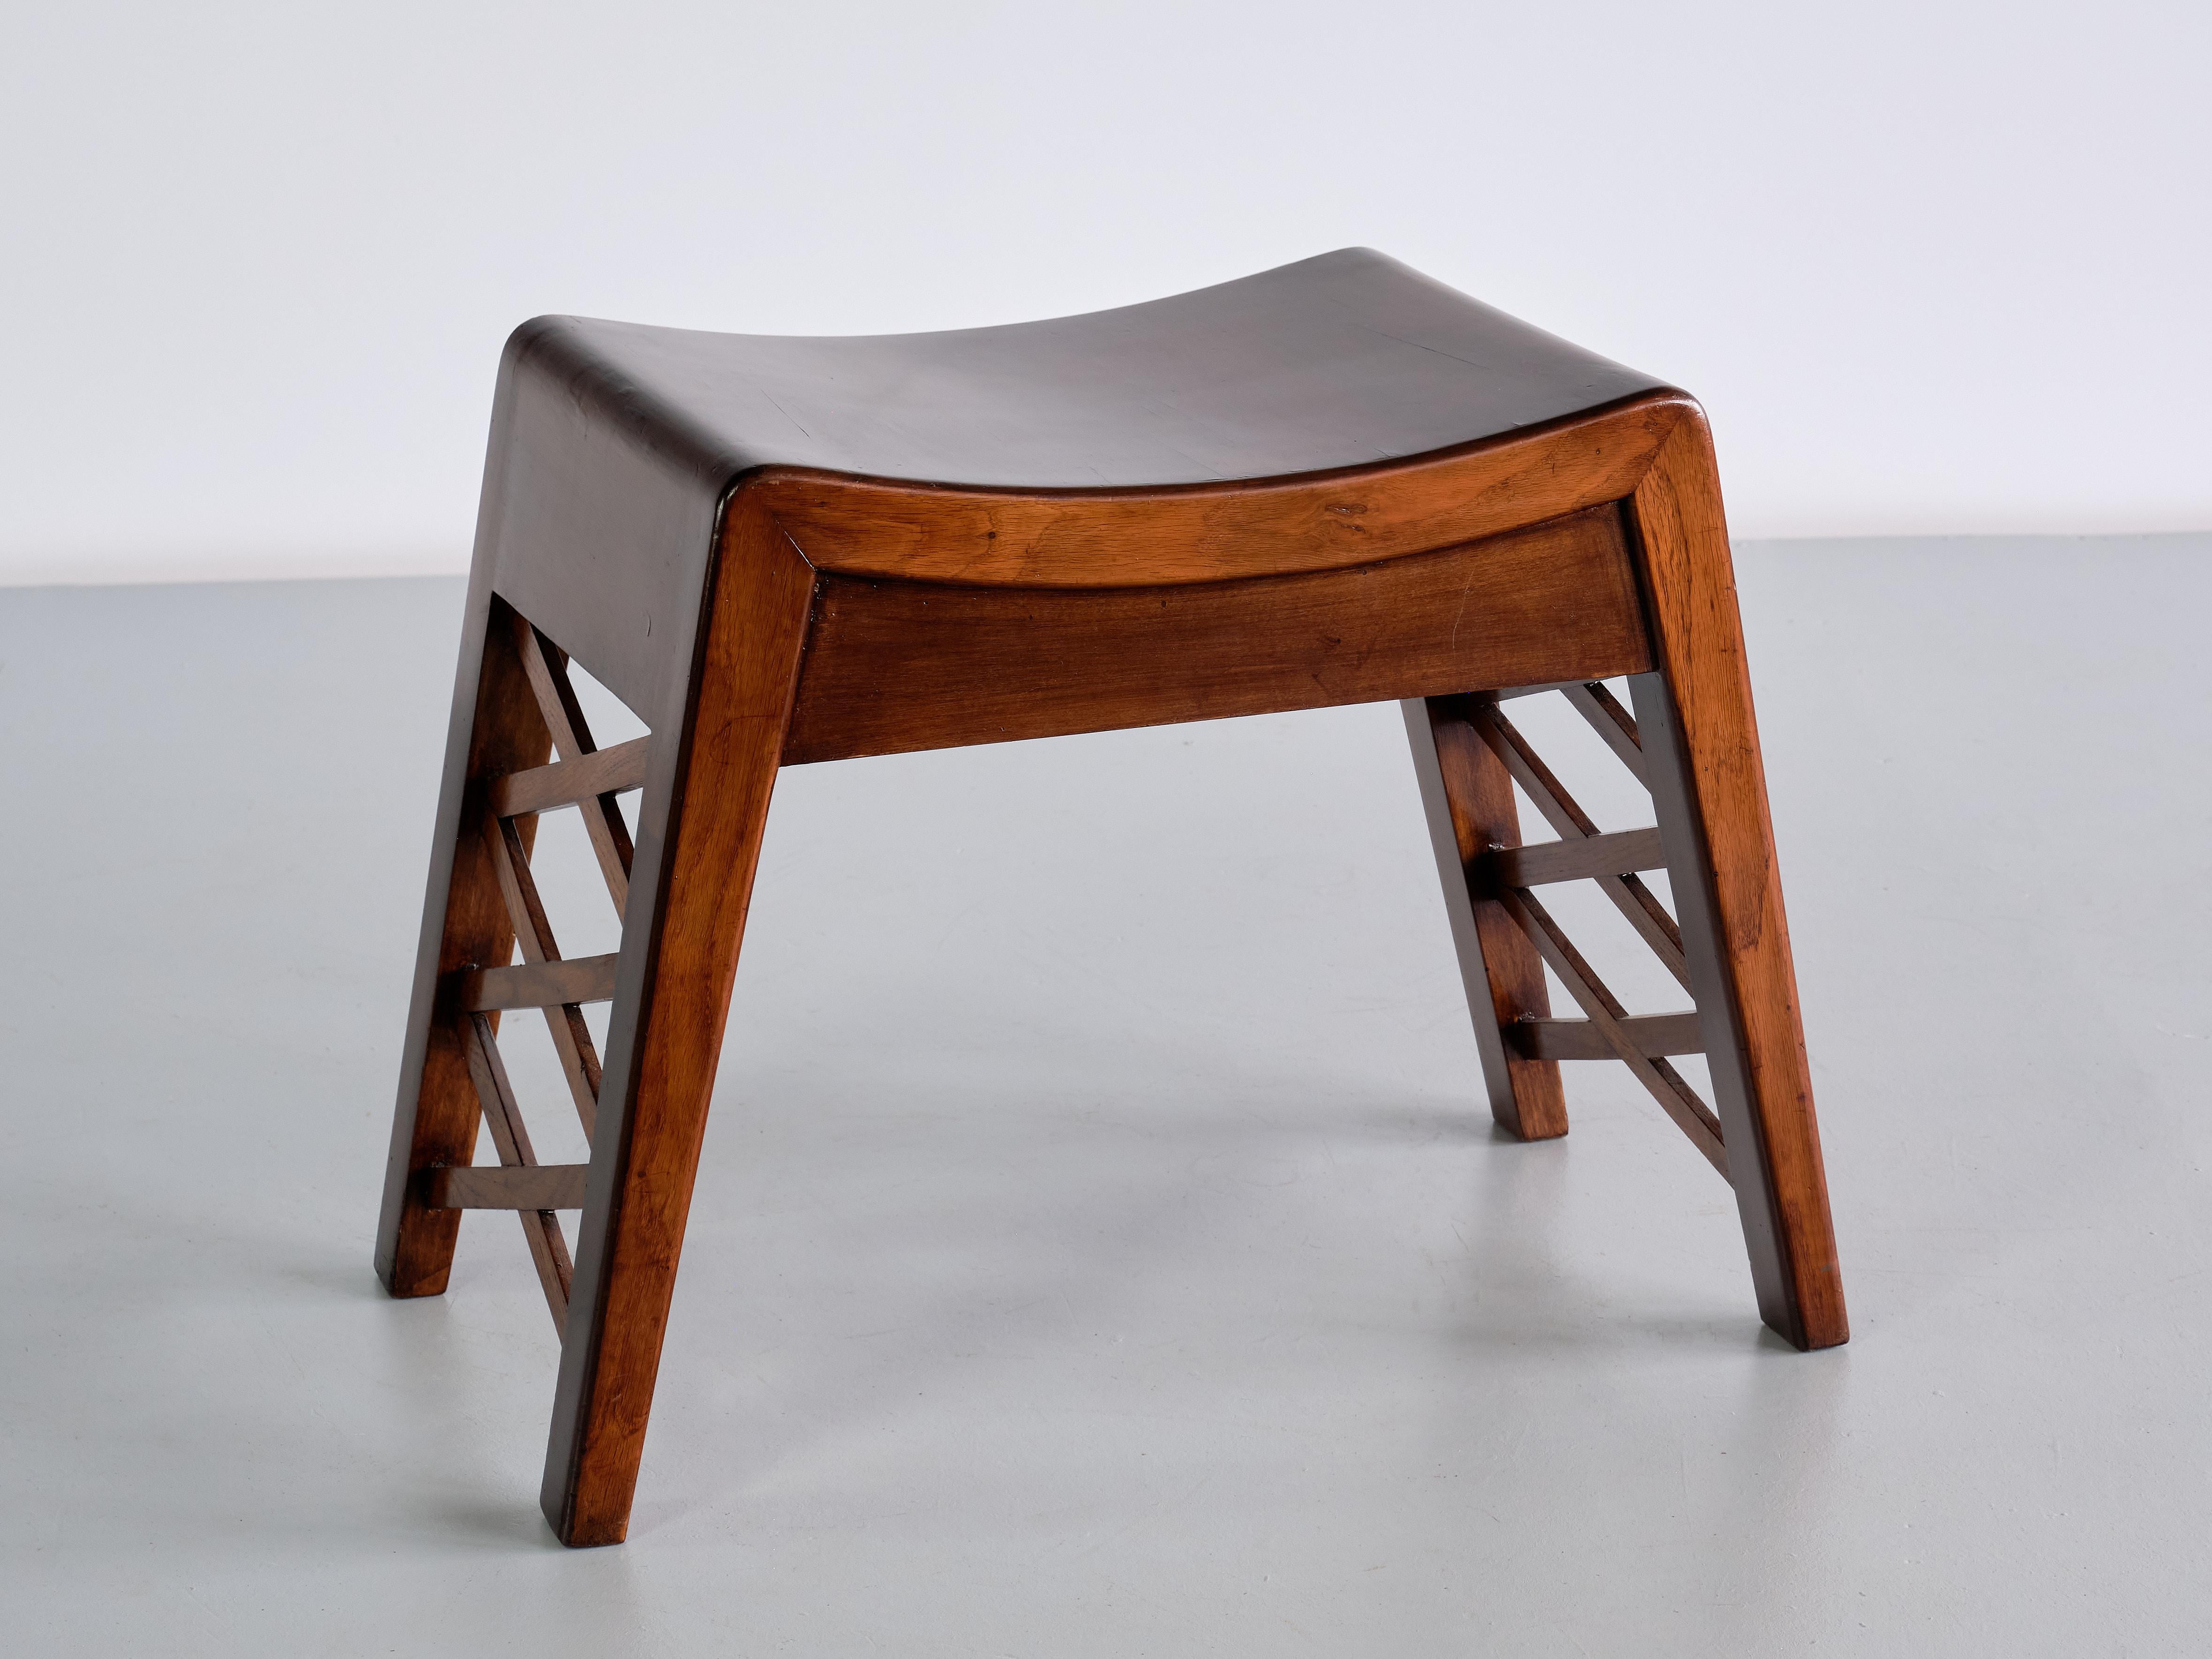 Mid-20th Century Piero Portaluppi Attributed Pair of Stools in Chestnut Wood, Italy, Late 1930s For Sale